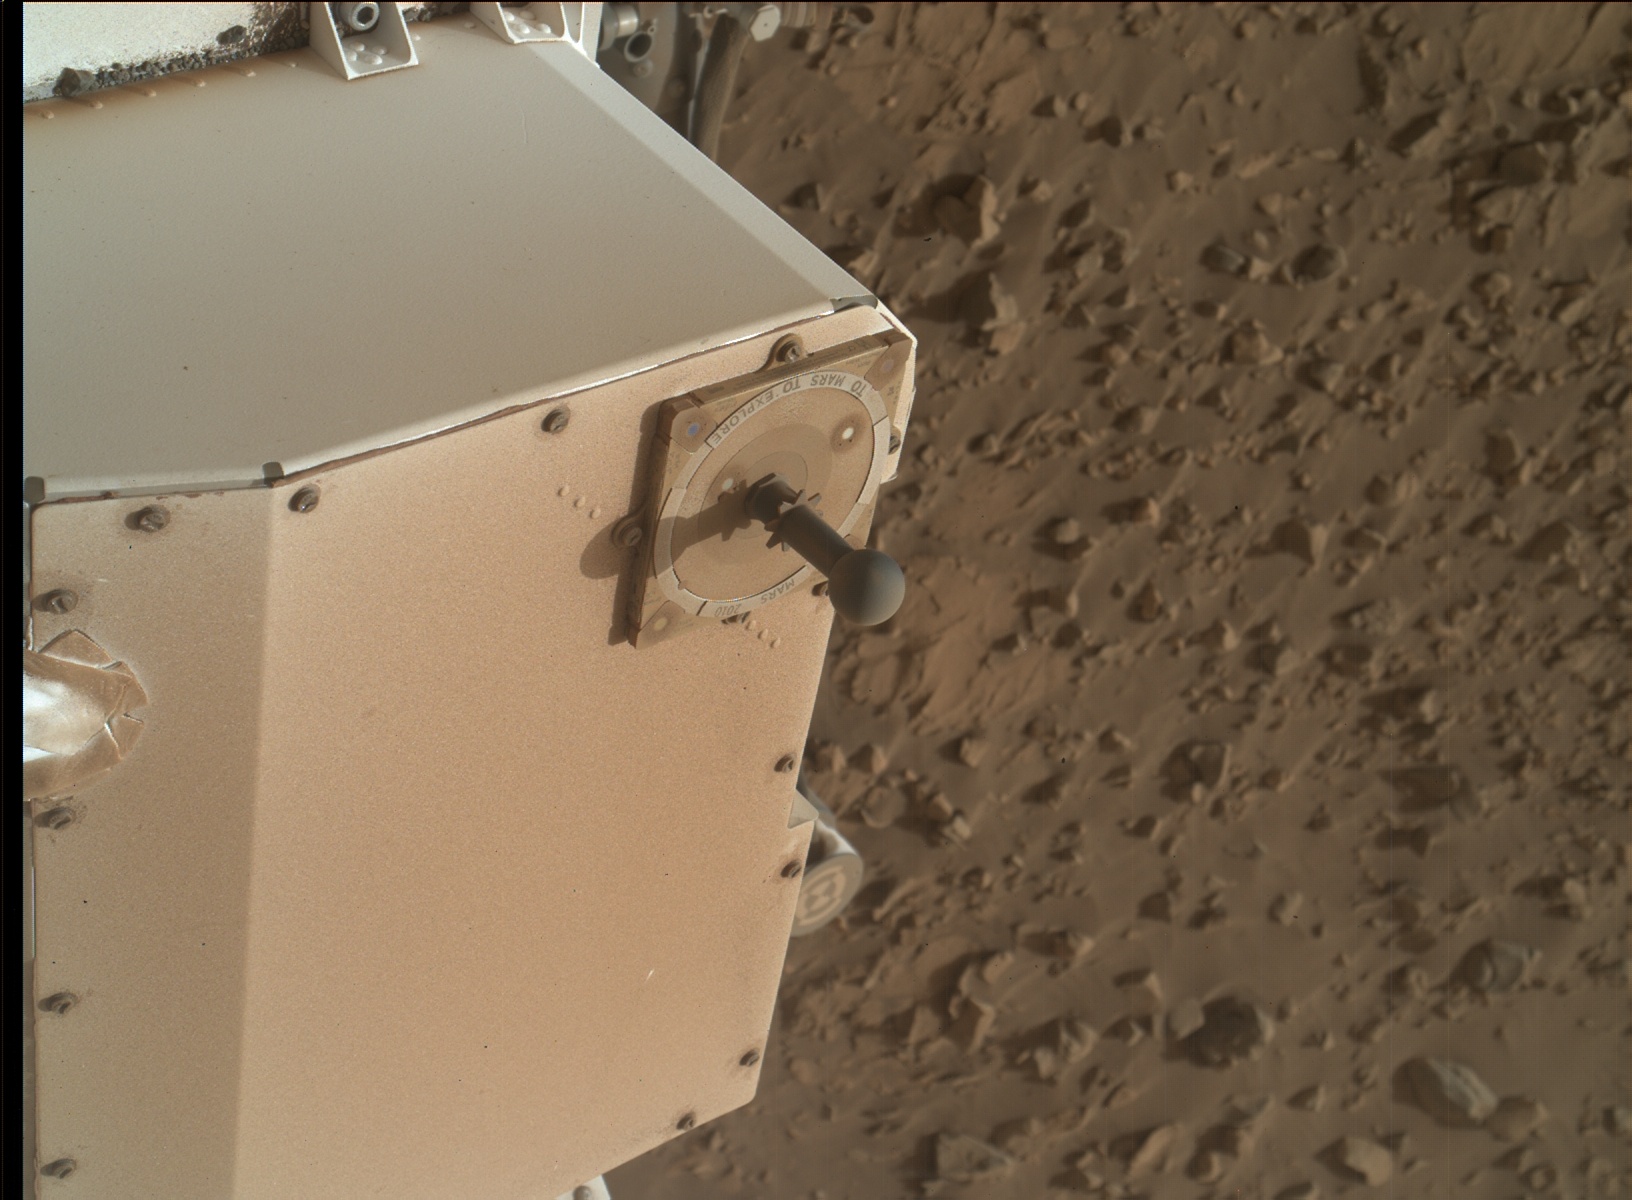 Nasa's Mars rover Curiosity acquired this image using its Mars Hand Lens Imager (MAHLI) on Sol 707